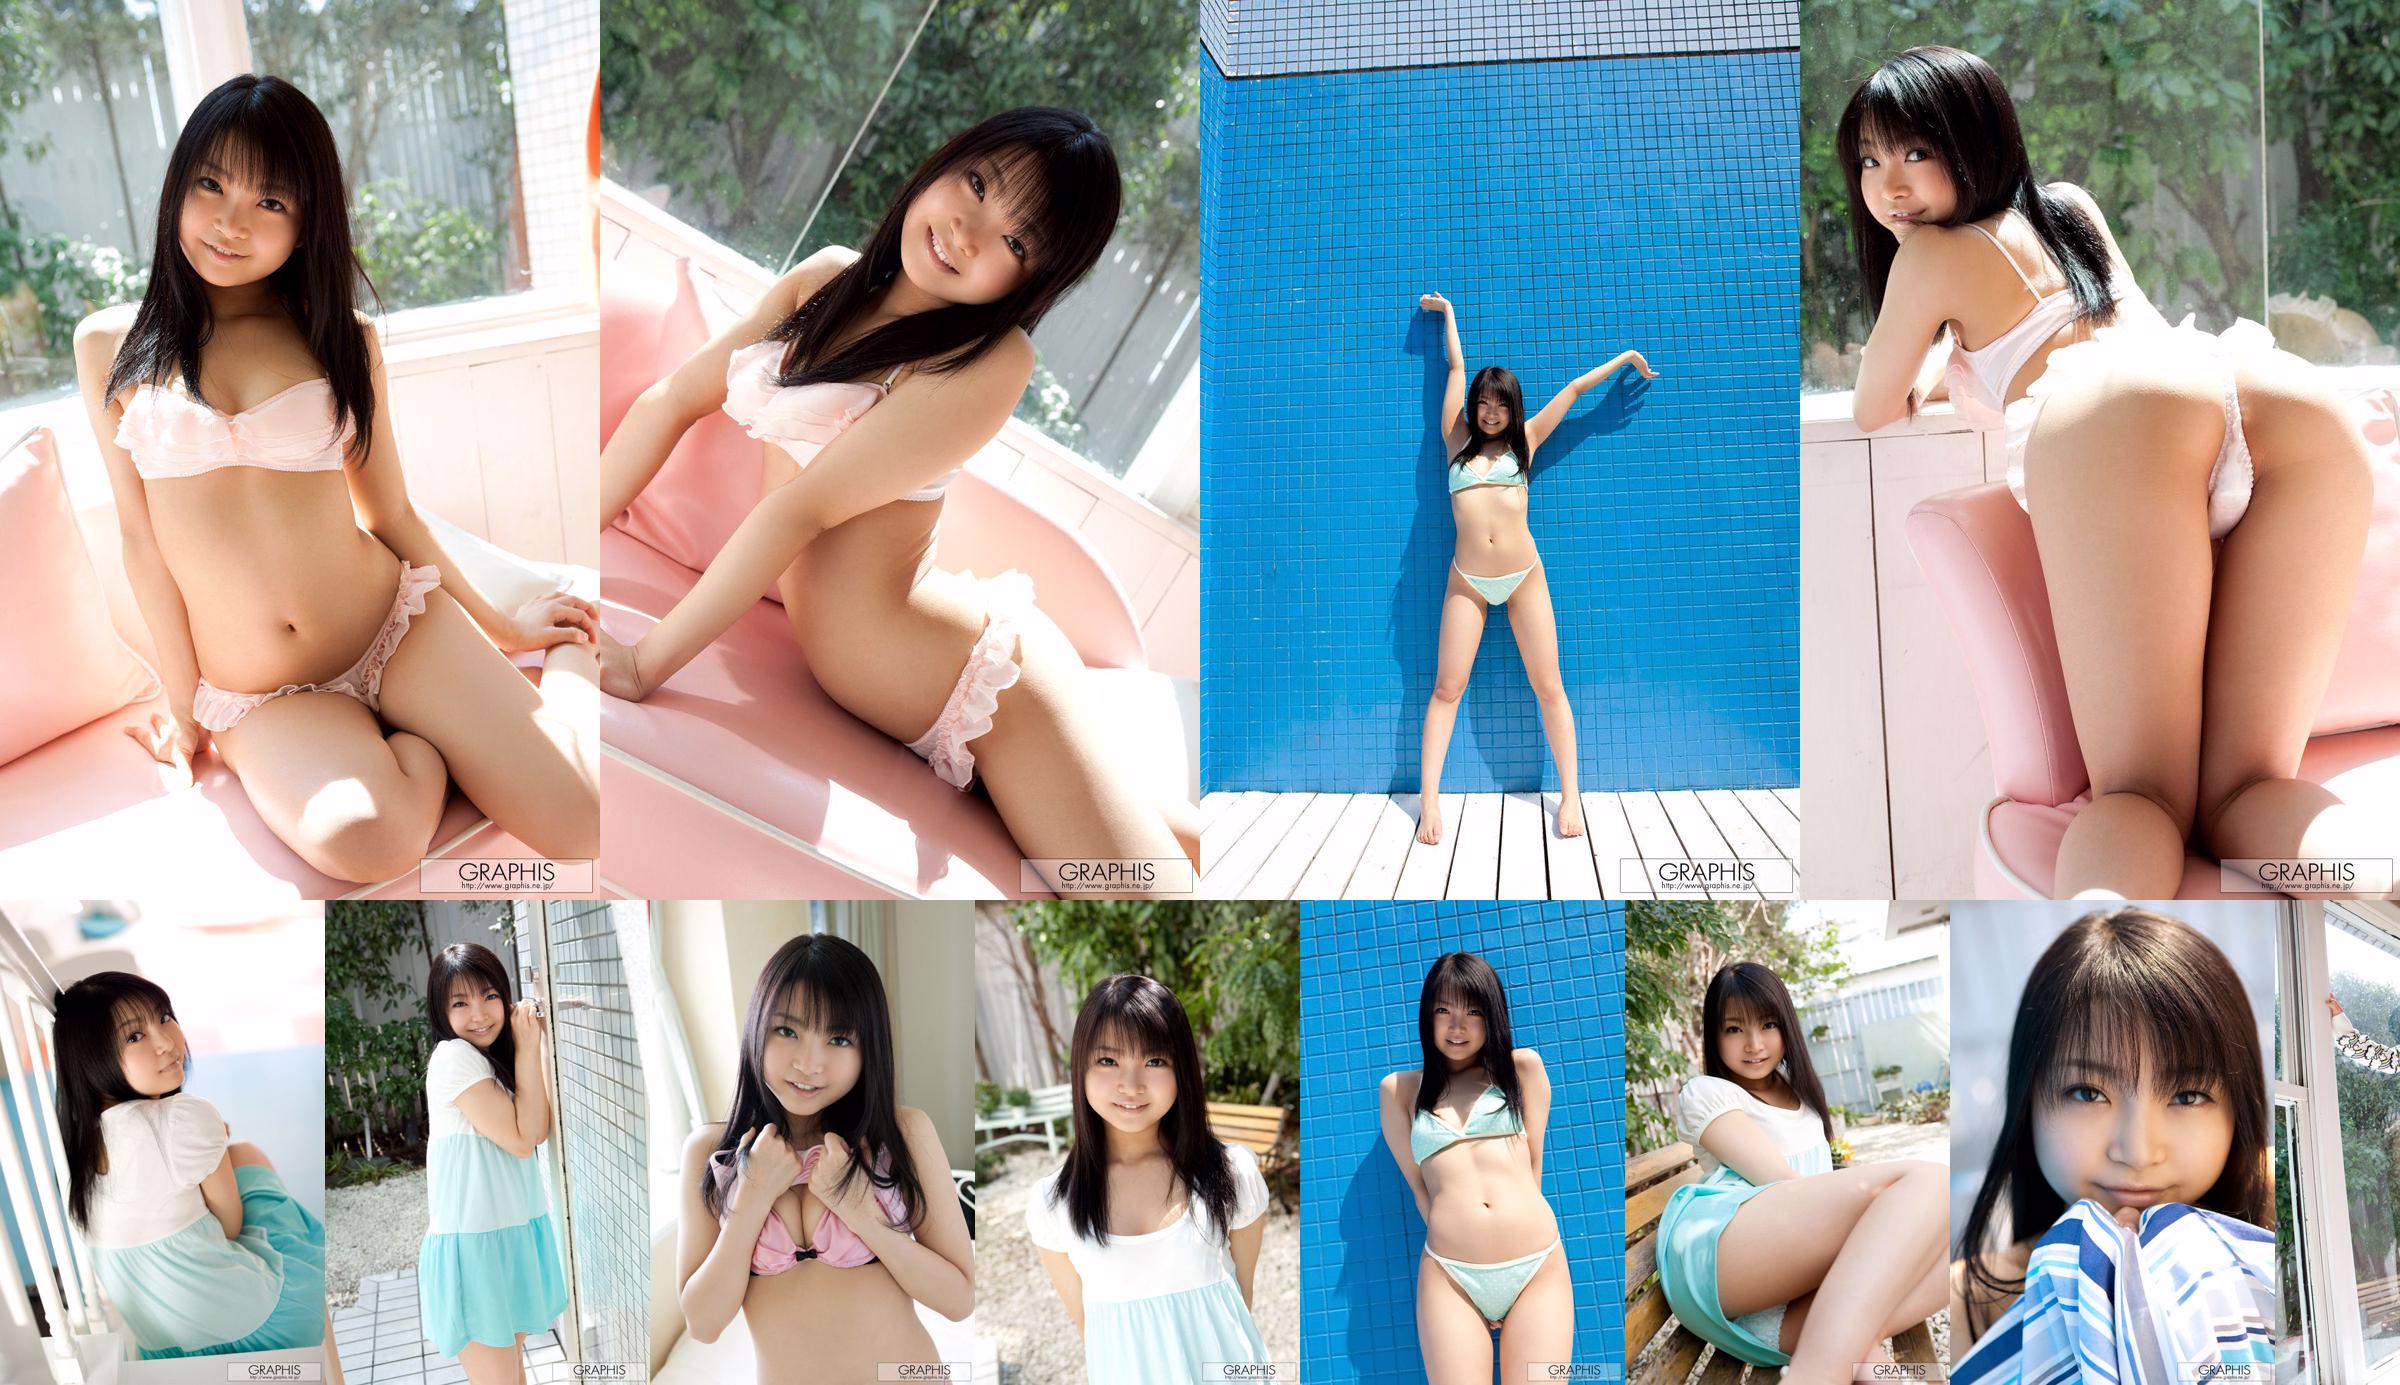 Chihiro Aoi / Chihiro Aoi [Graphis] First Gravure First off daughter No.12e7c2 Page 1